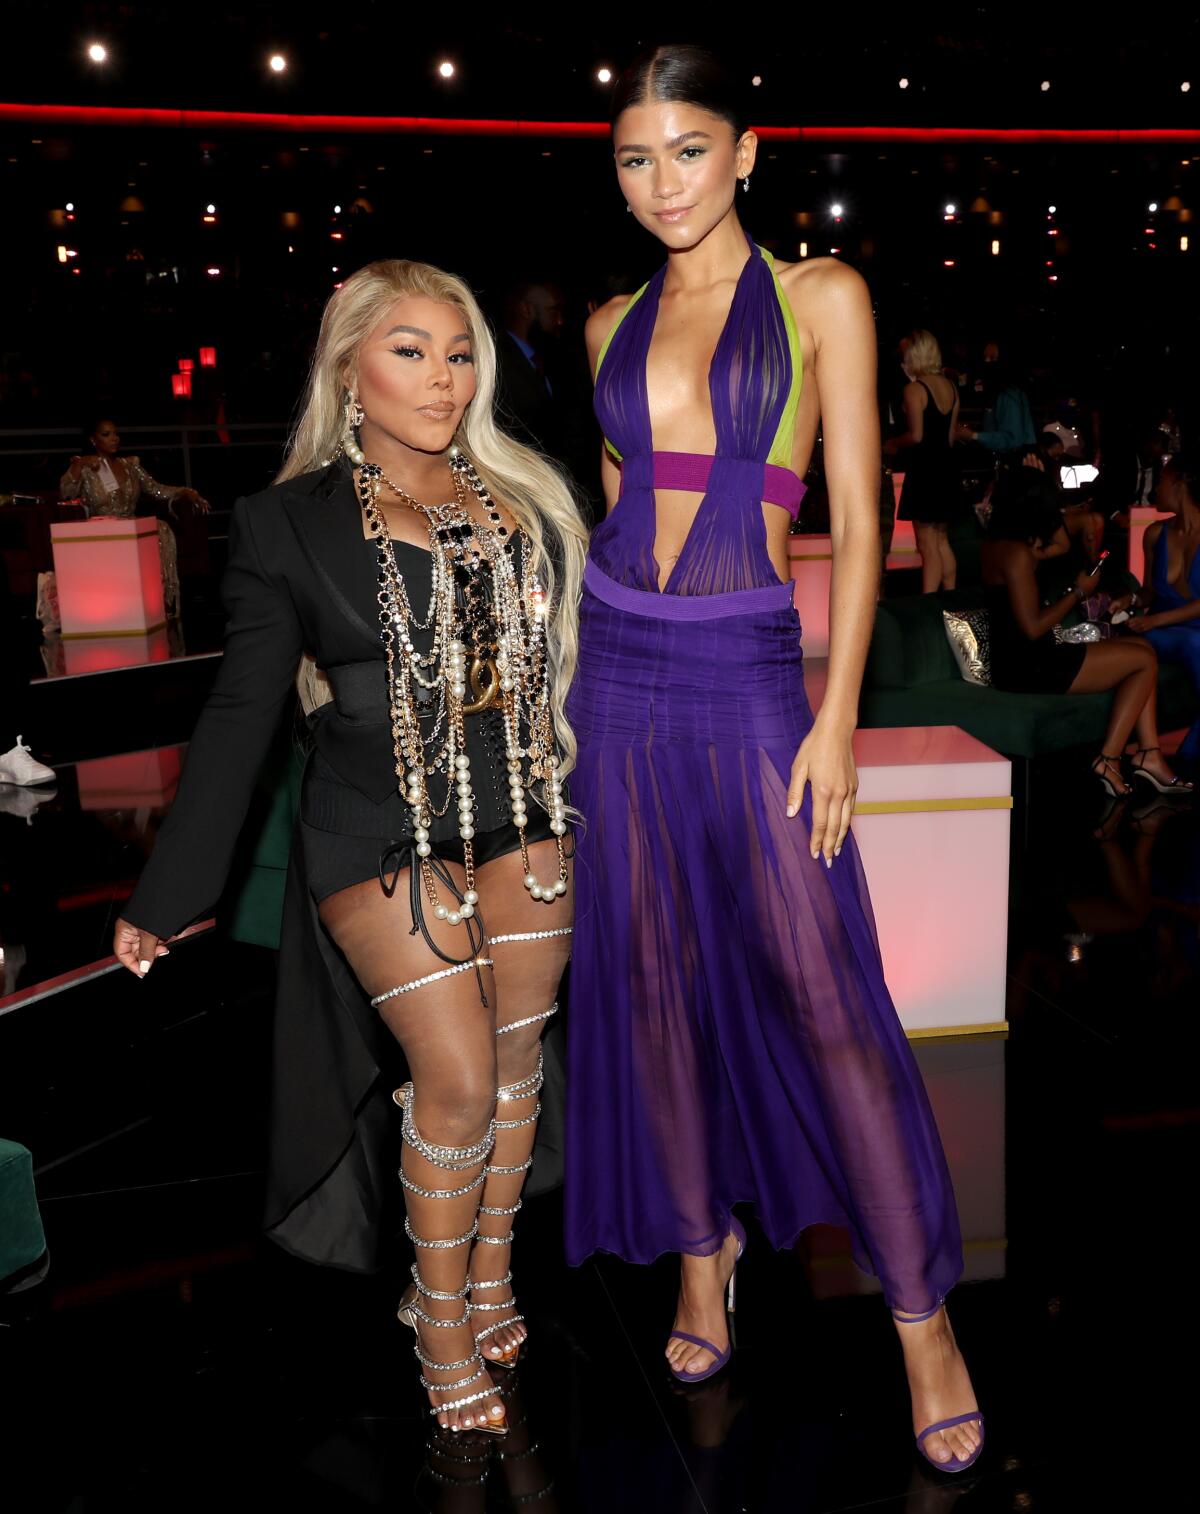 Two women in formal attire on a red carpet. One is in a black dress with necklace, the other is in a purple see through gown